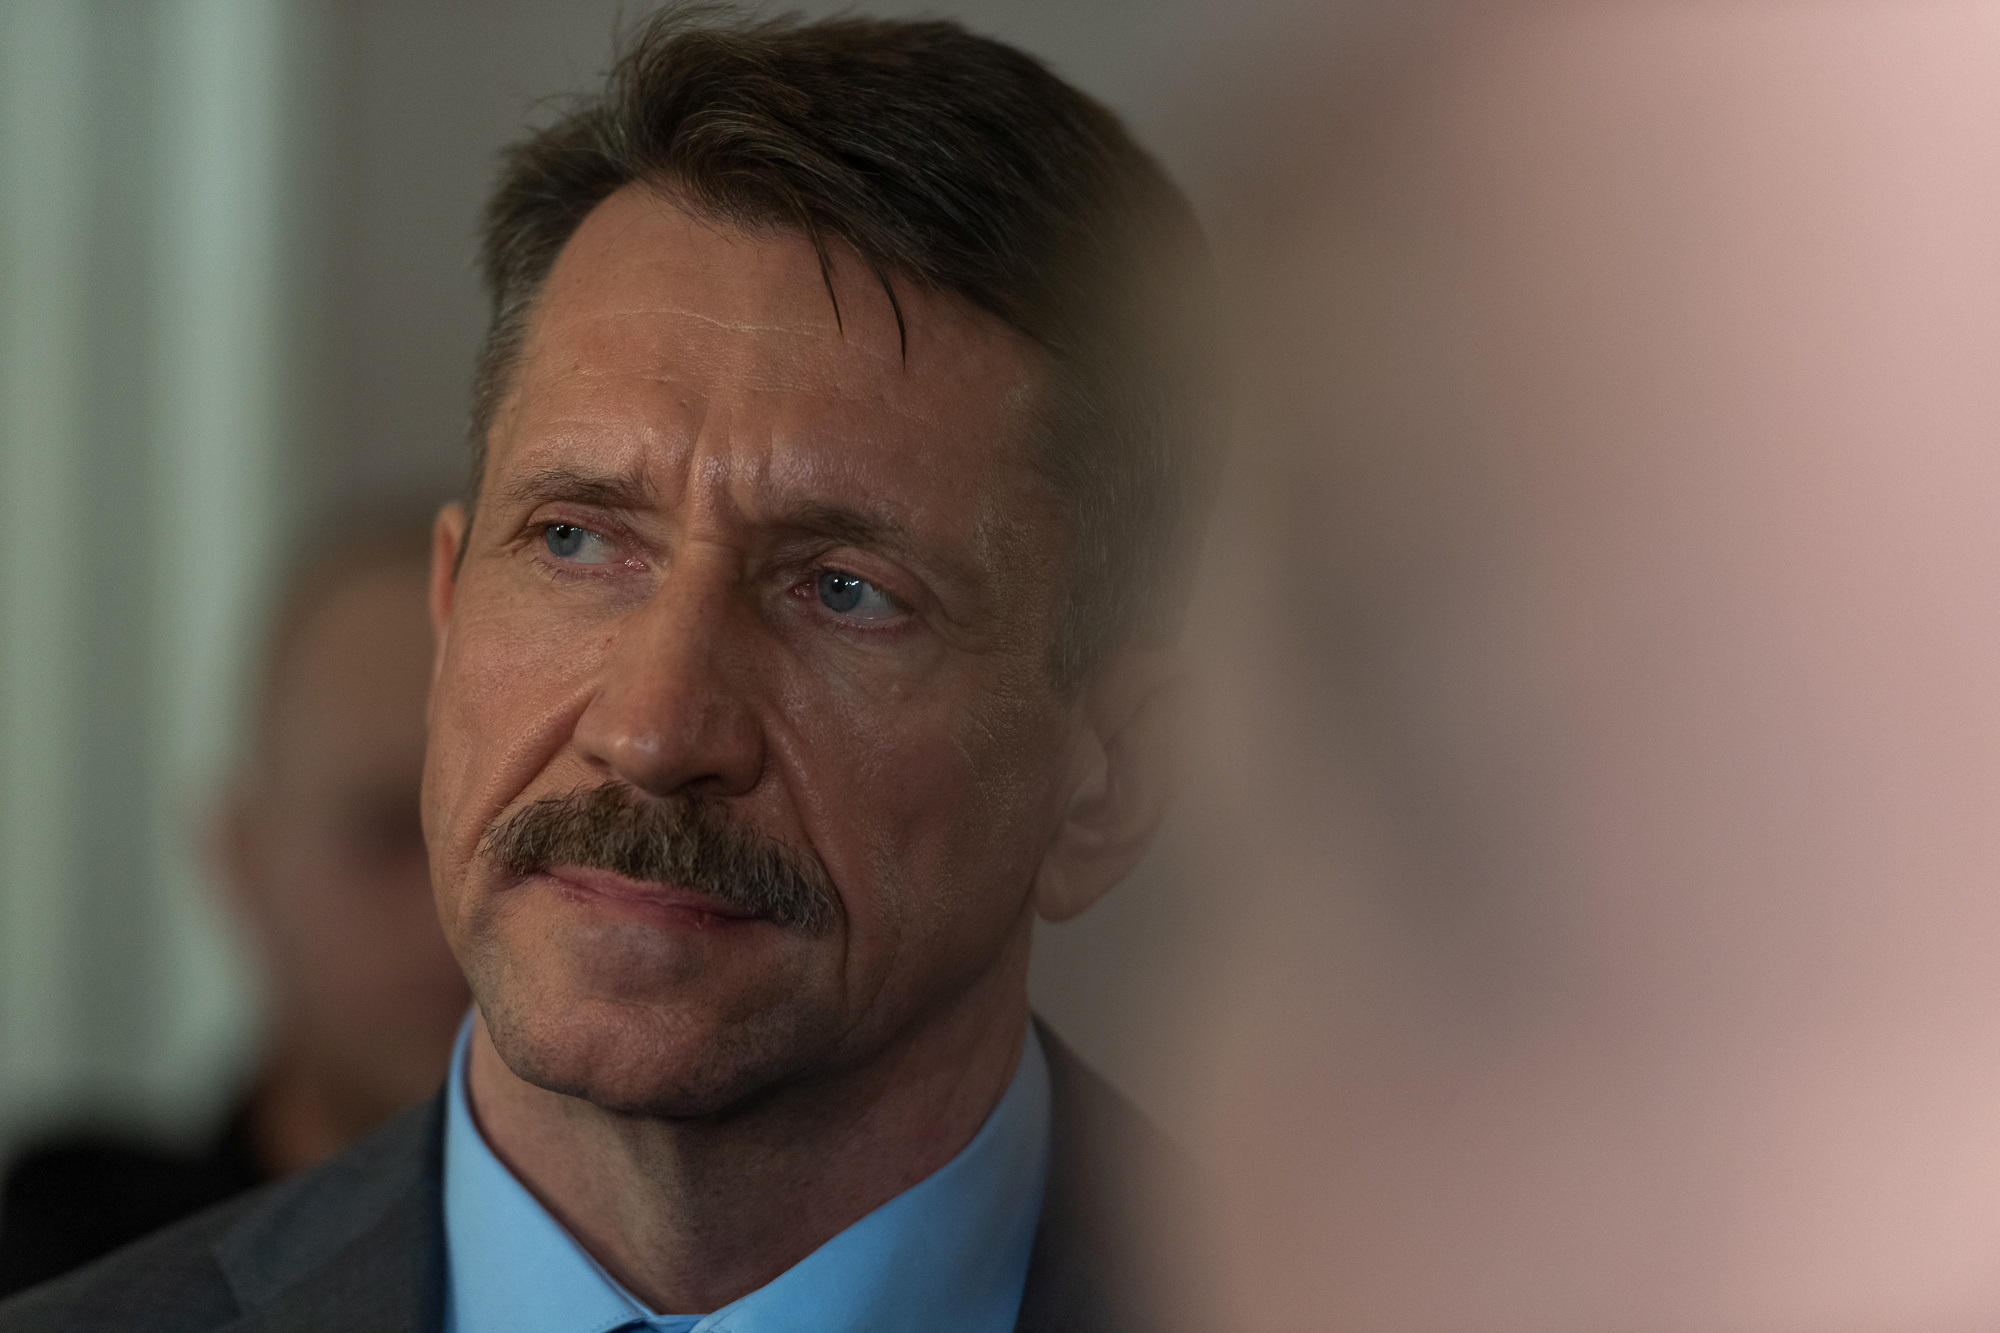 Viktor Bout attends a convention of the Liberal Democratic Party of Russia (LDPR) in Moscow, Russia on December 12.